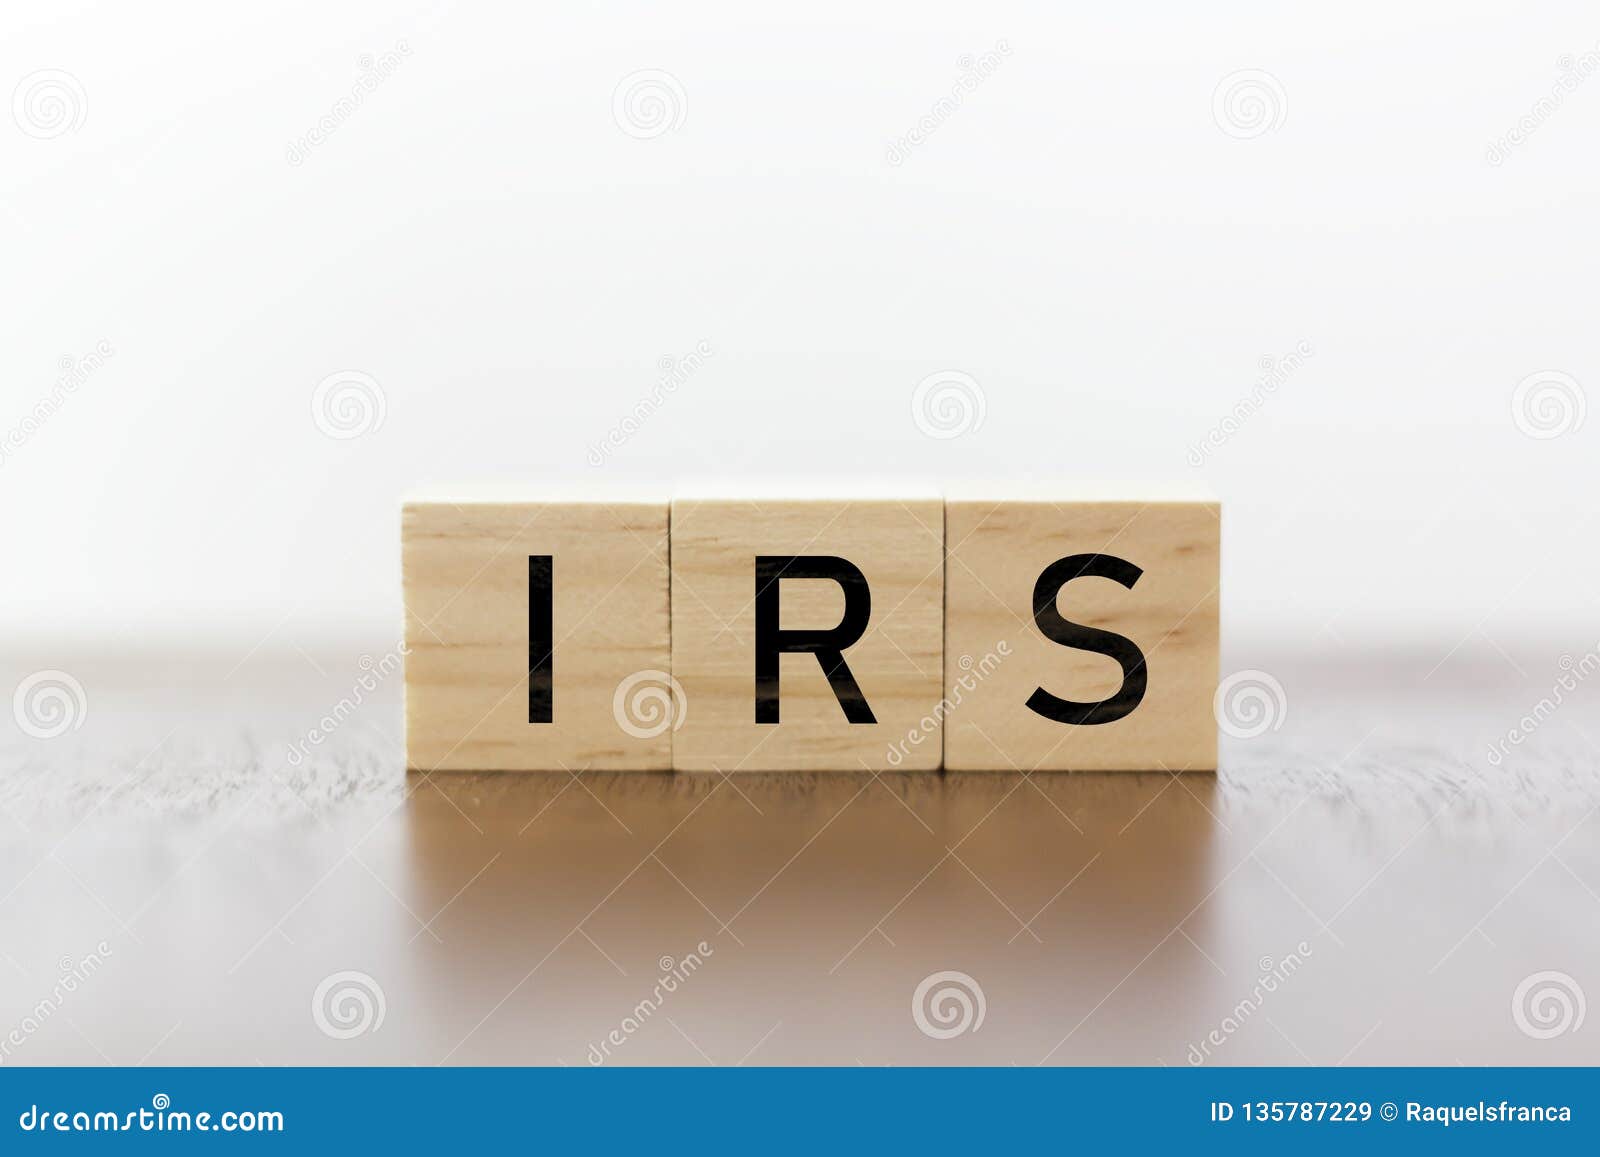 irs word on wooden cubes